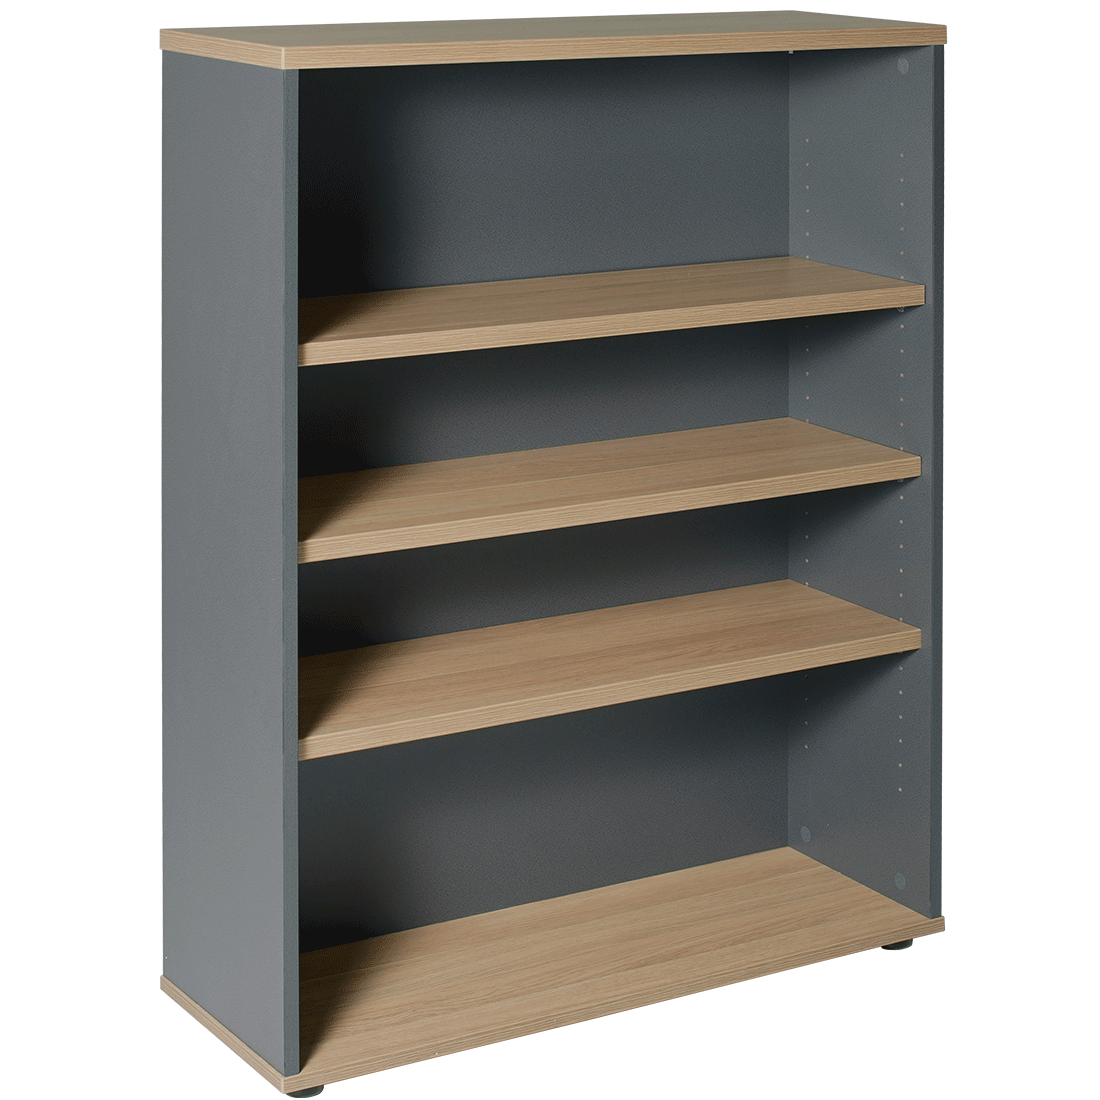 Rapid Worker Bookcases - switchoffice.com.au